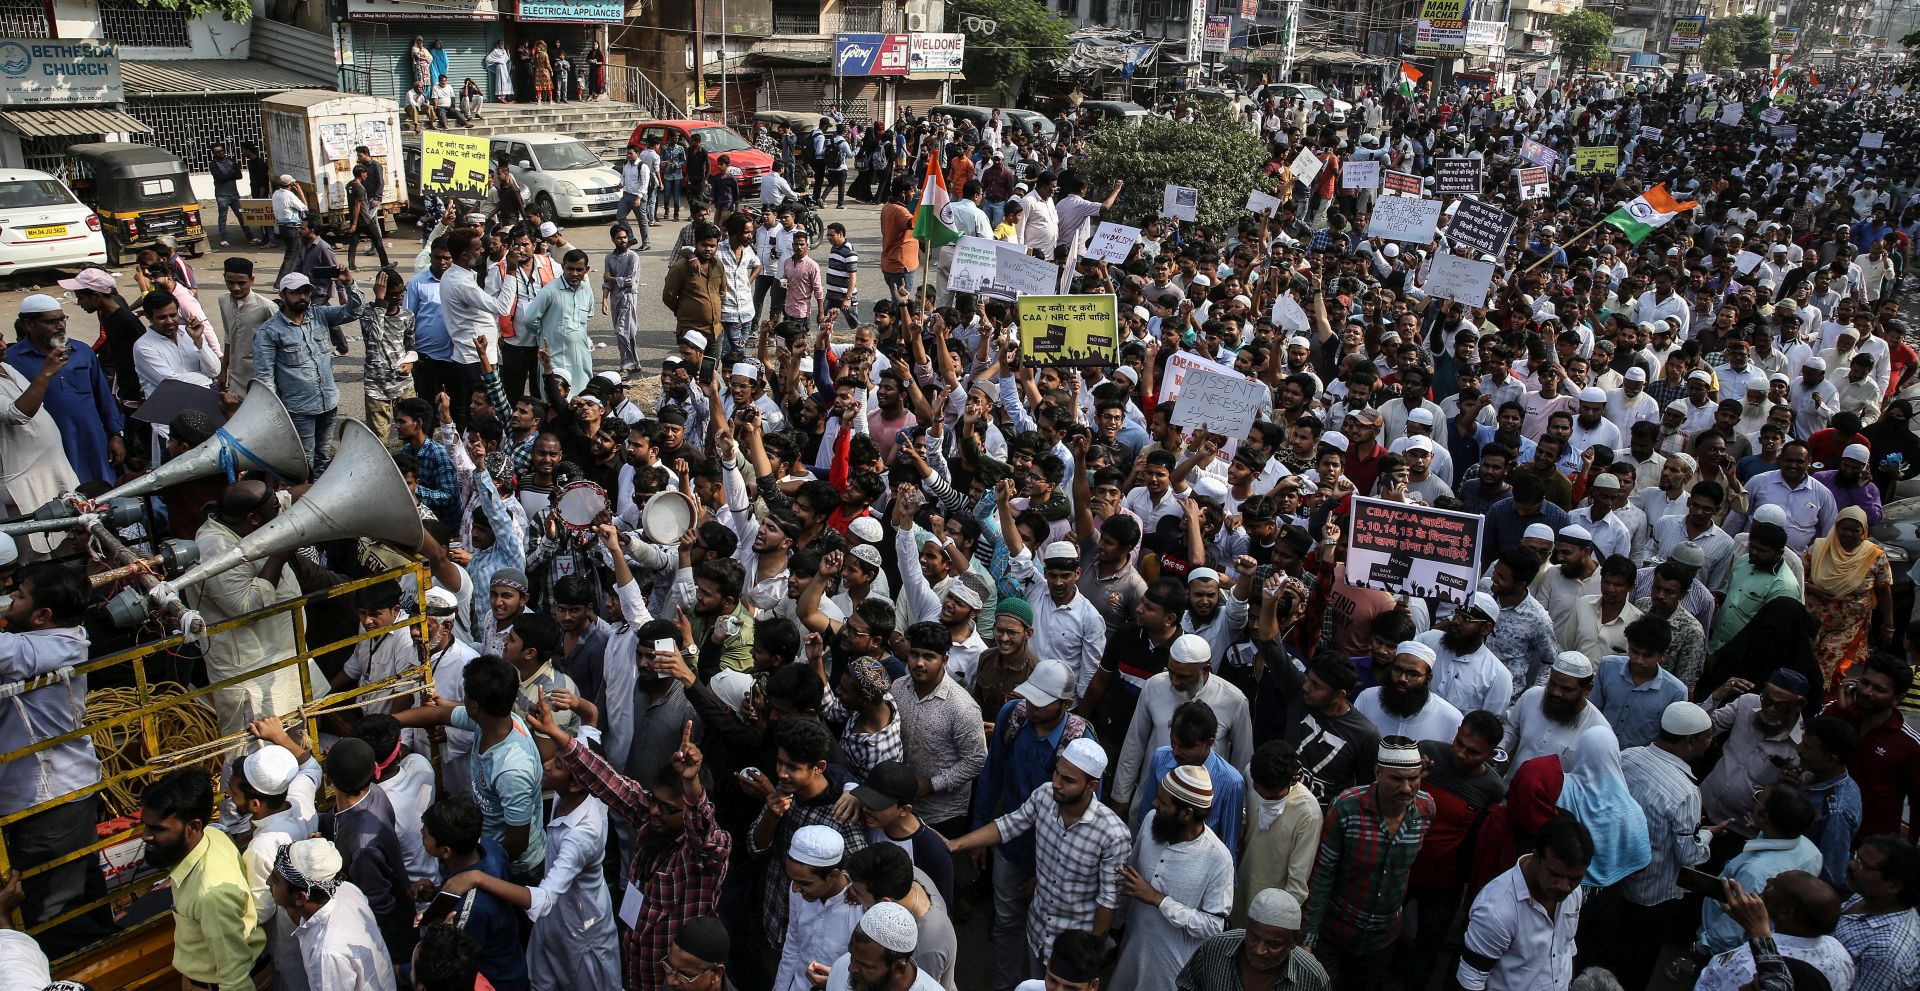 epa08079437 Indian Muslim protesters gather during a protest in solidarity with Jamia Millia Islamia University students and against the Citizenship Amendment Act (CAA) and National Register of Citizens (NRC), in Mumbra on the outskirts of Mumbai, India, 18 December 2019. According to news reports, four buses were set on fire during the demonstrations, with Delhi Police later allegedly entering the Jamia Millia Islamia University campus and detained some people believed to be violent protesters.  EPA/DIVYAKANT SOLANKI